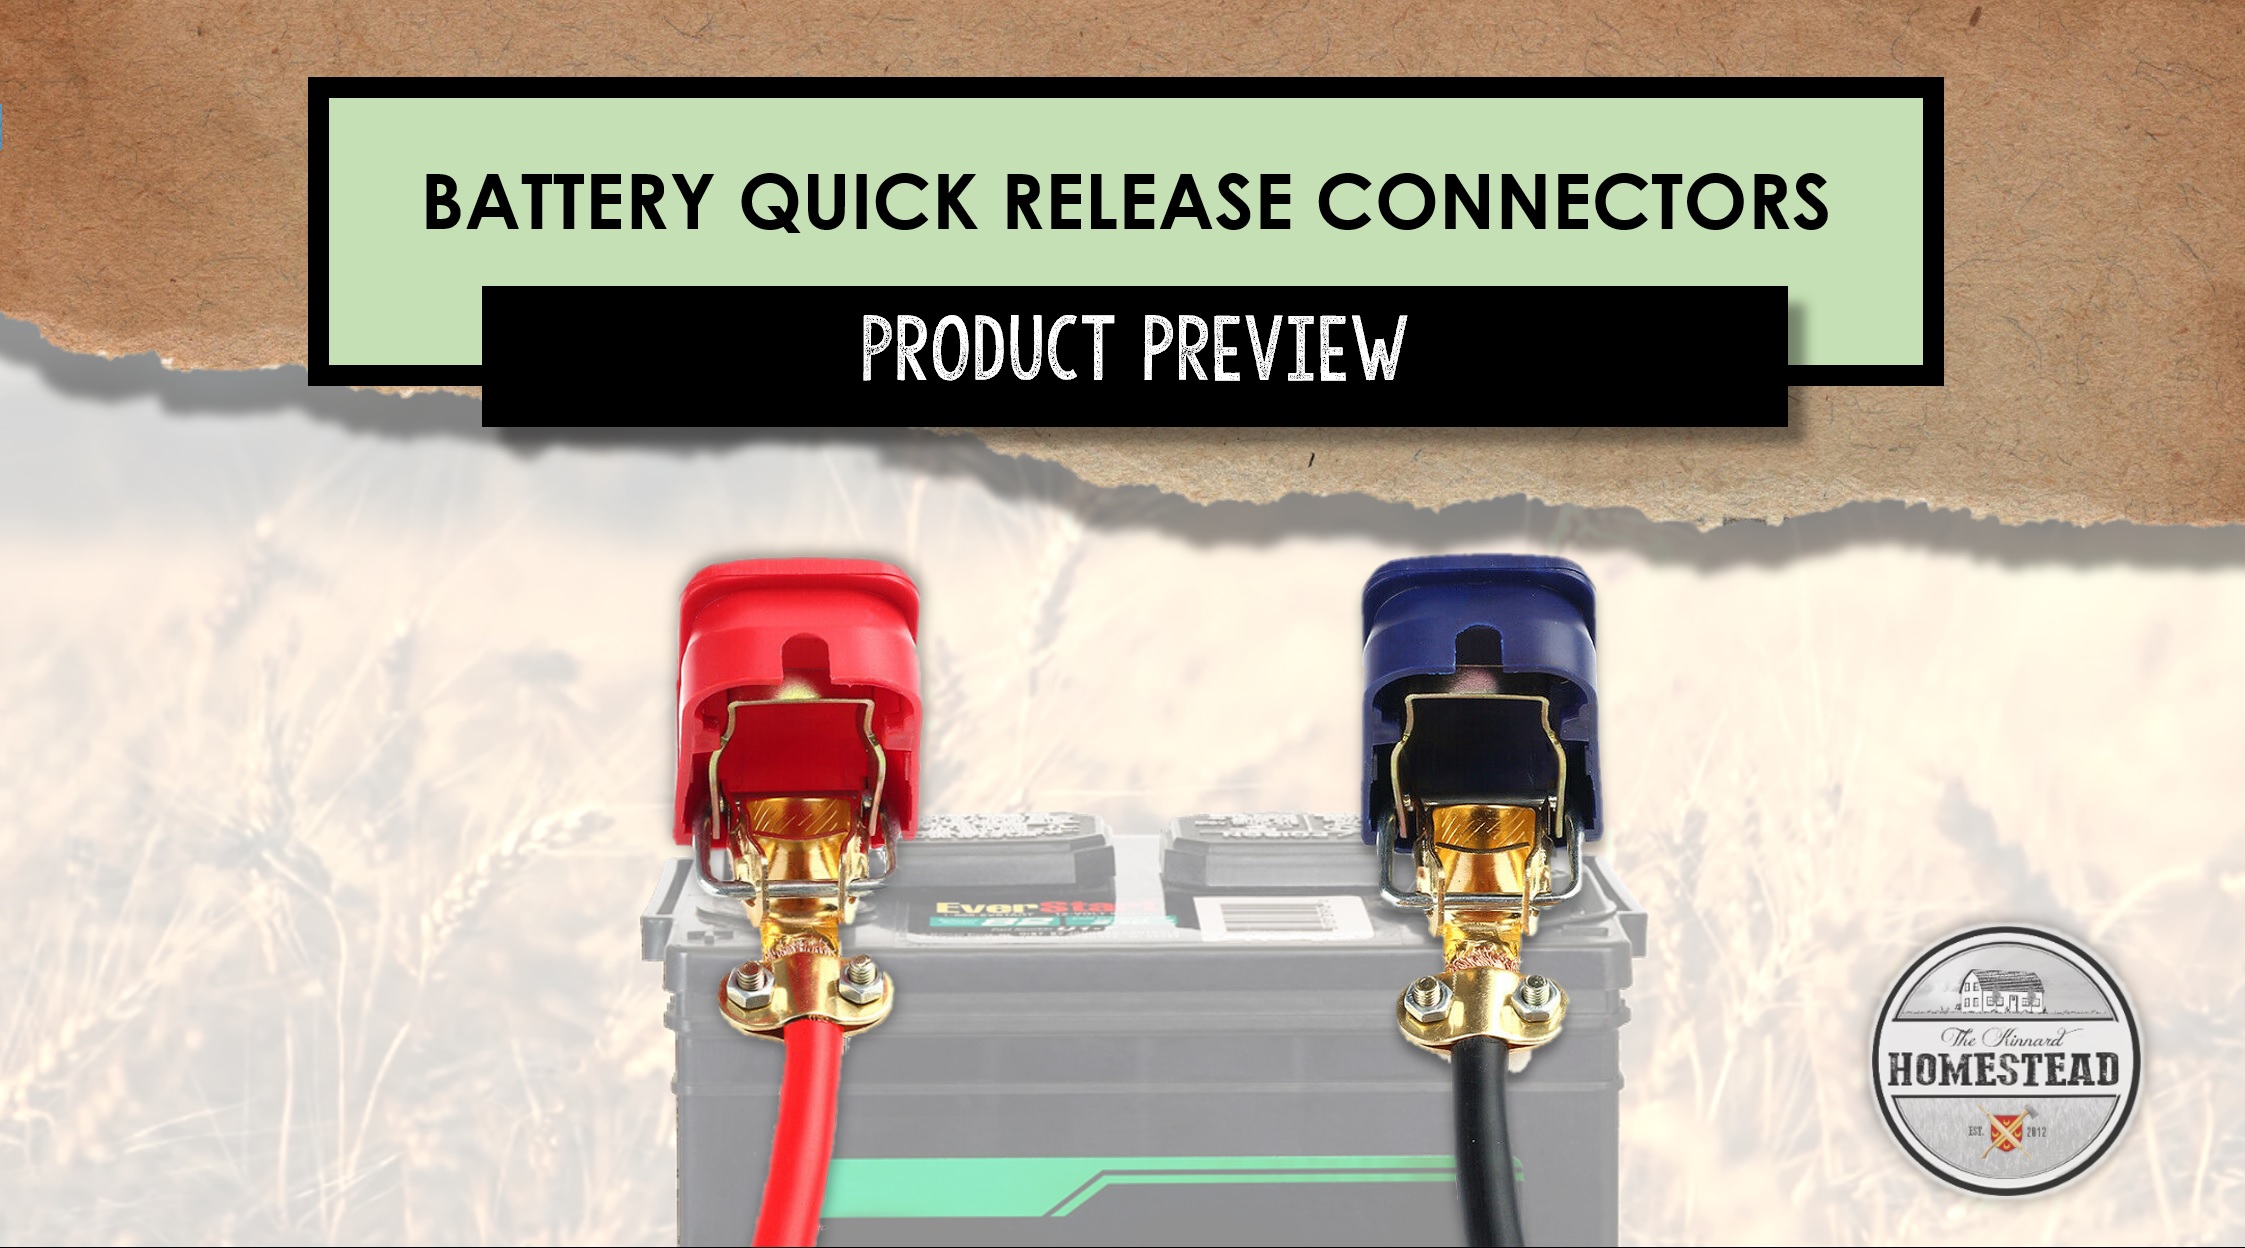 Battery Quick Release Connectors | Product Preview